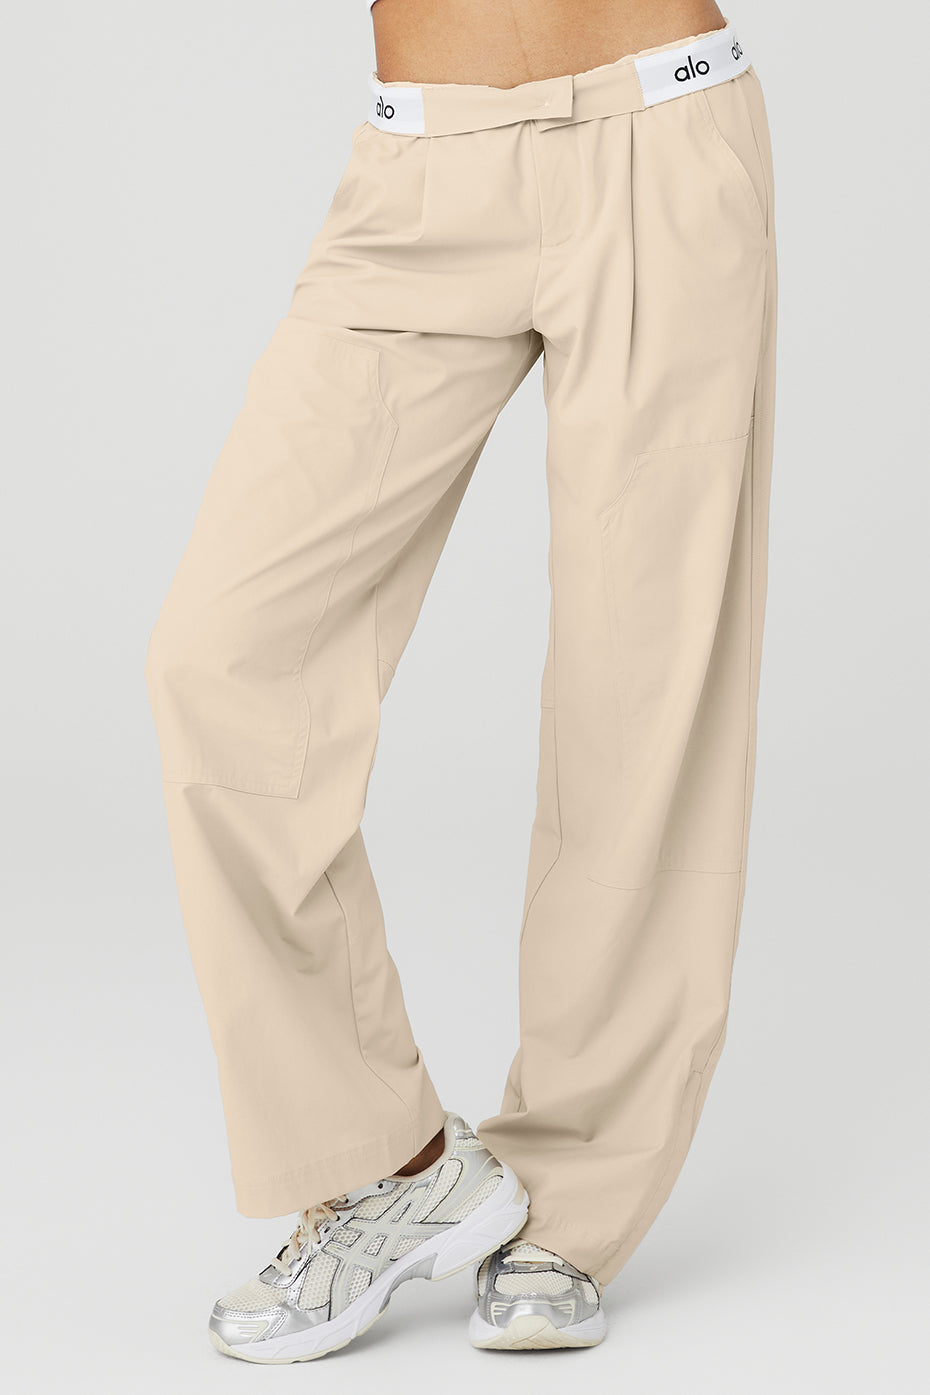 Alo Pants Are Here — Tailored Trousers With A Twist